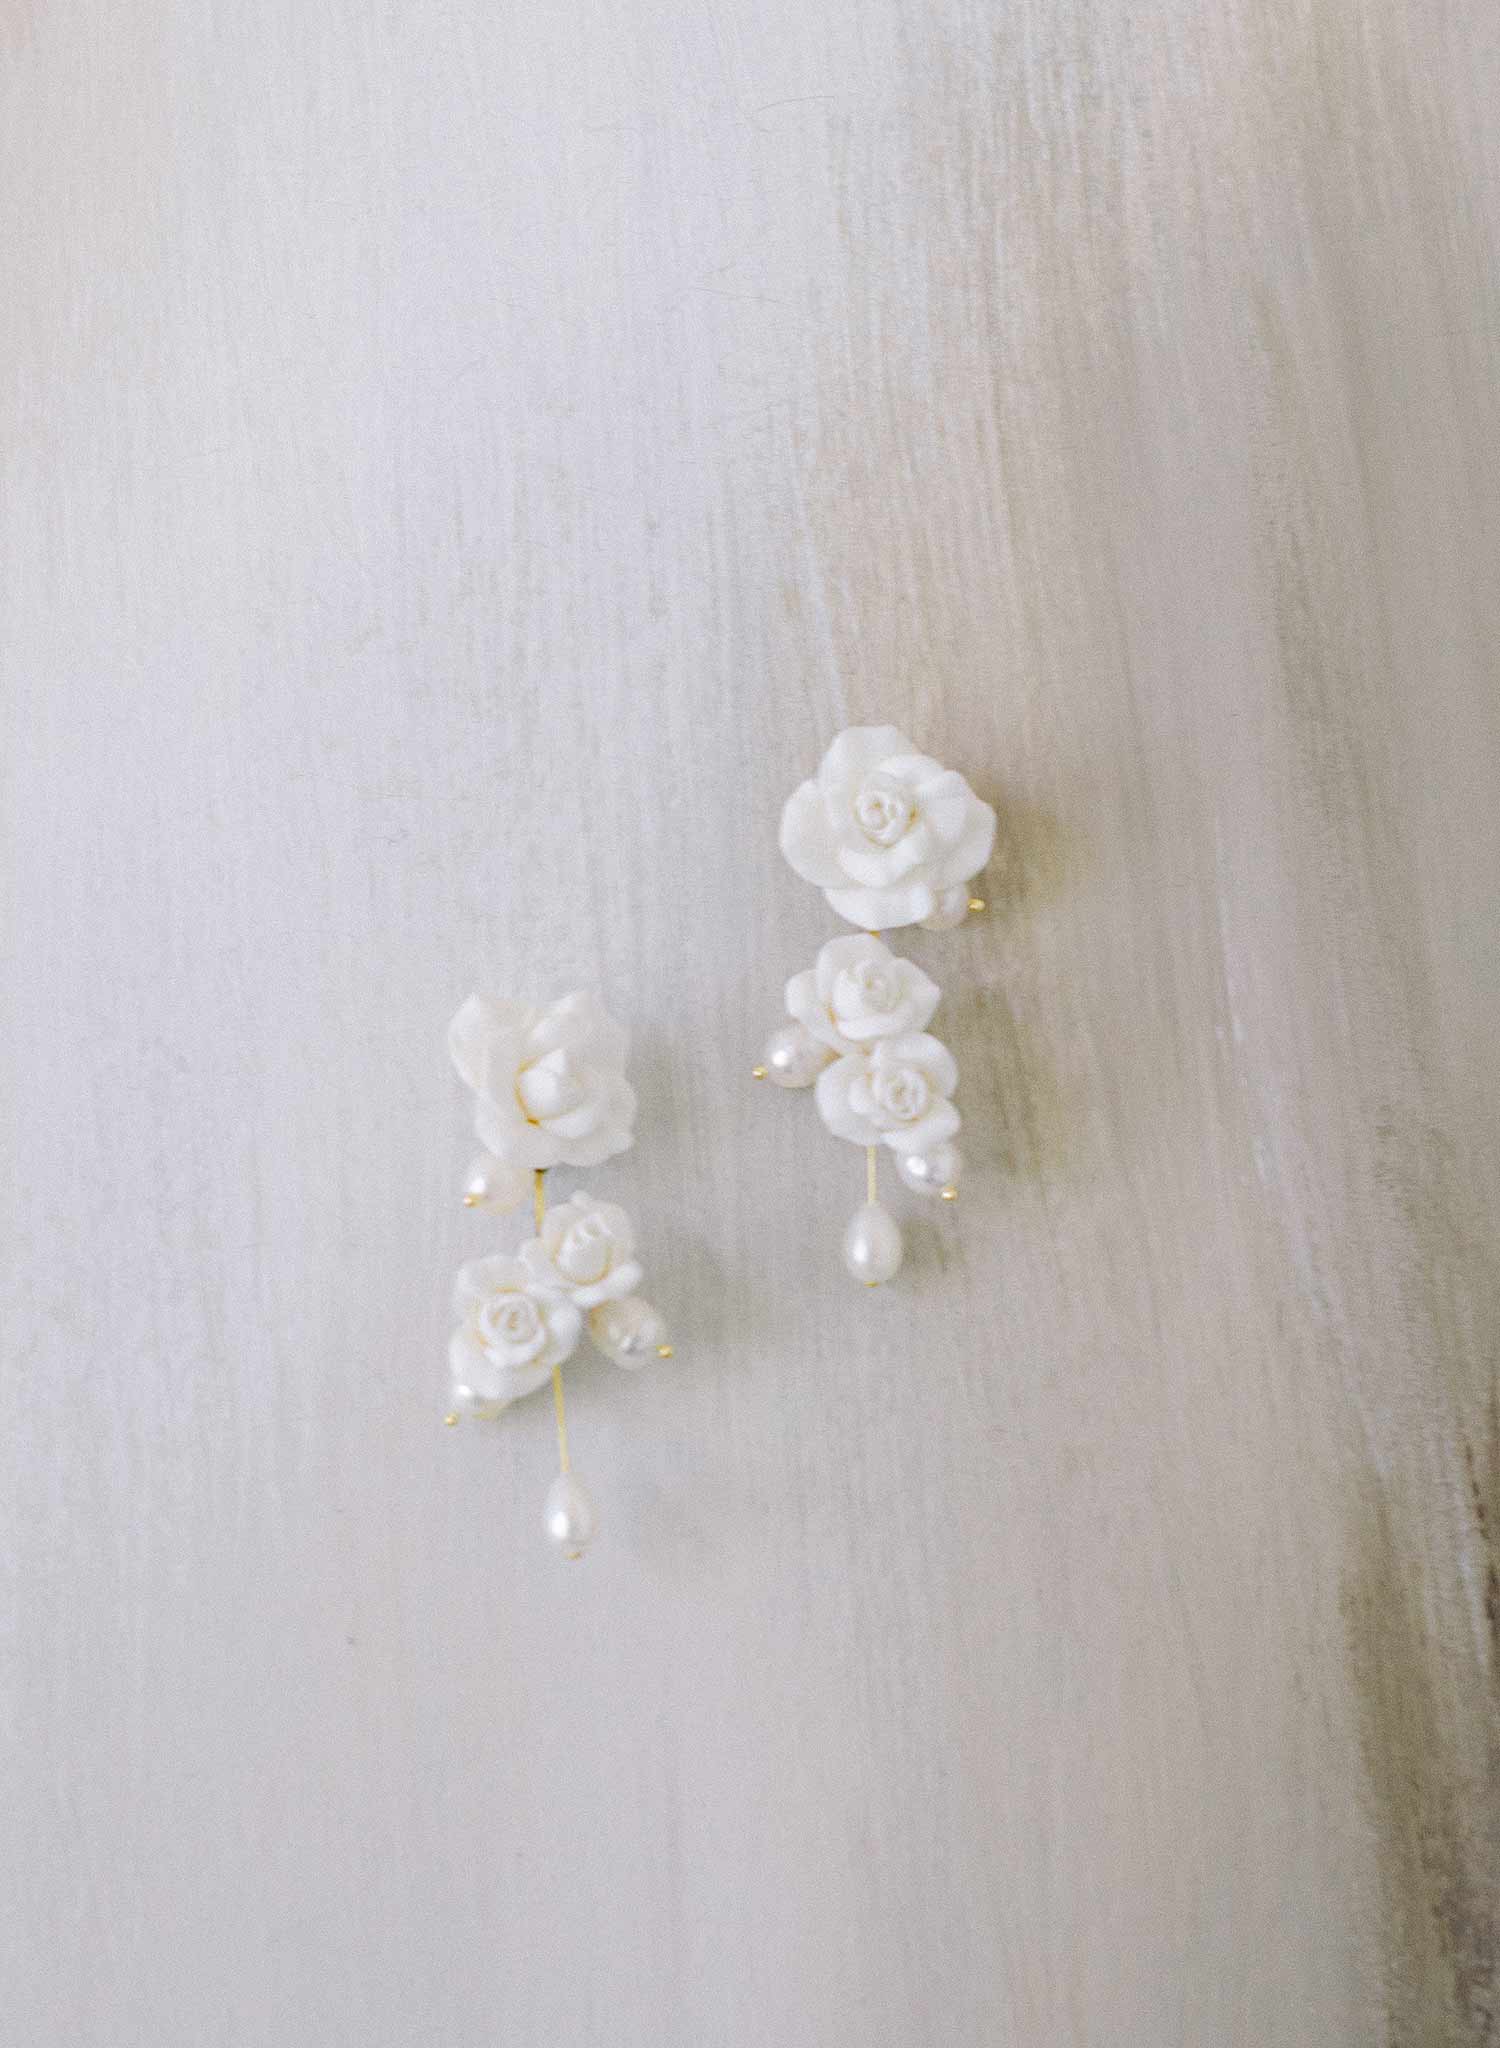 Rose blooms and pearls earrings - Style #2318